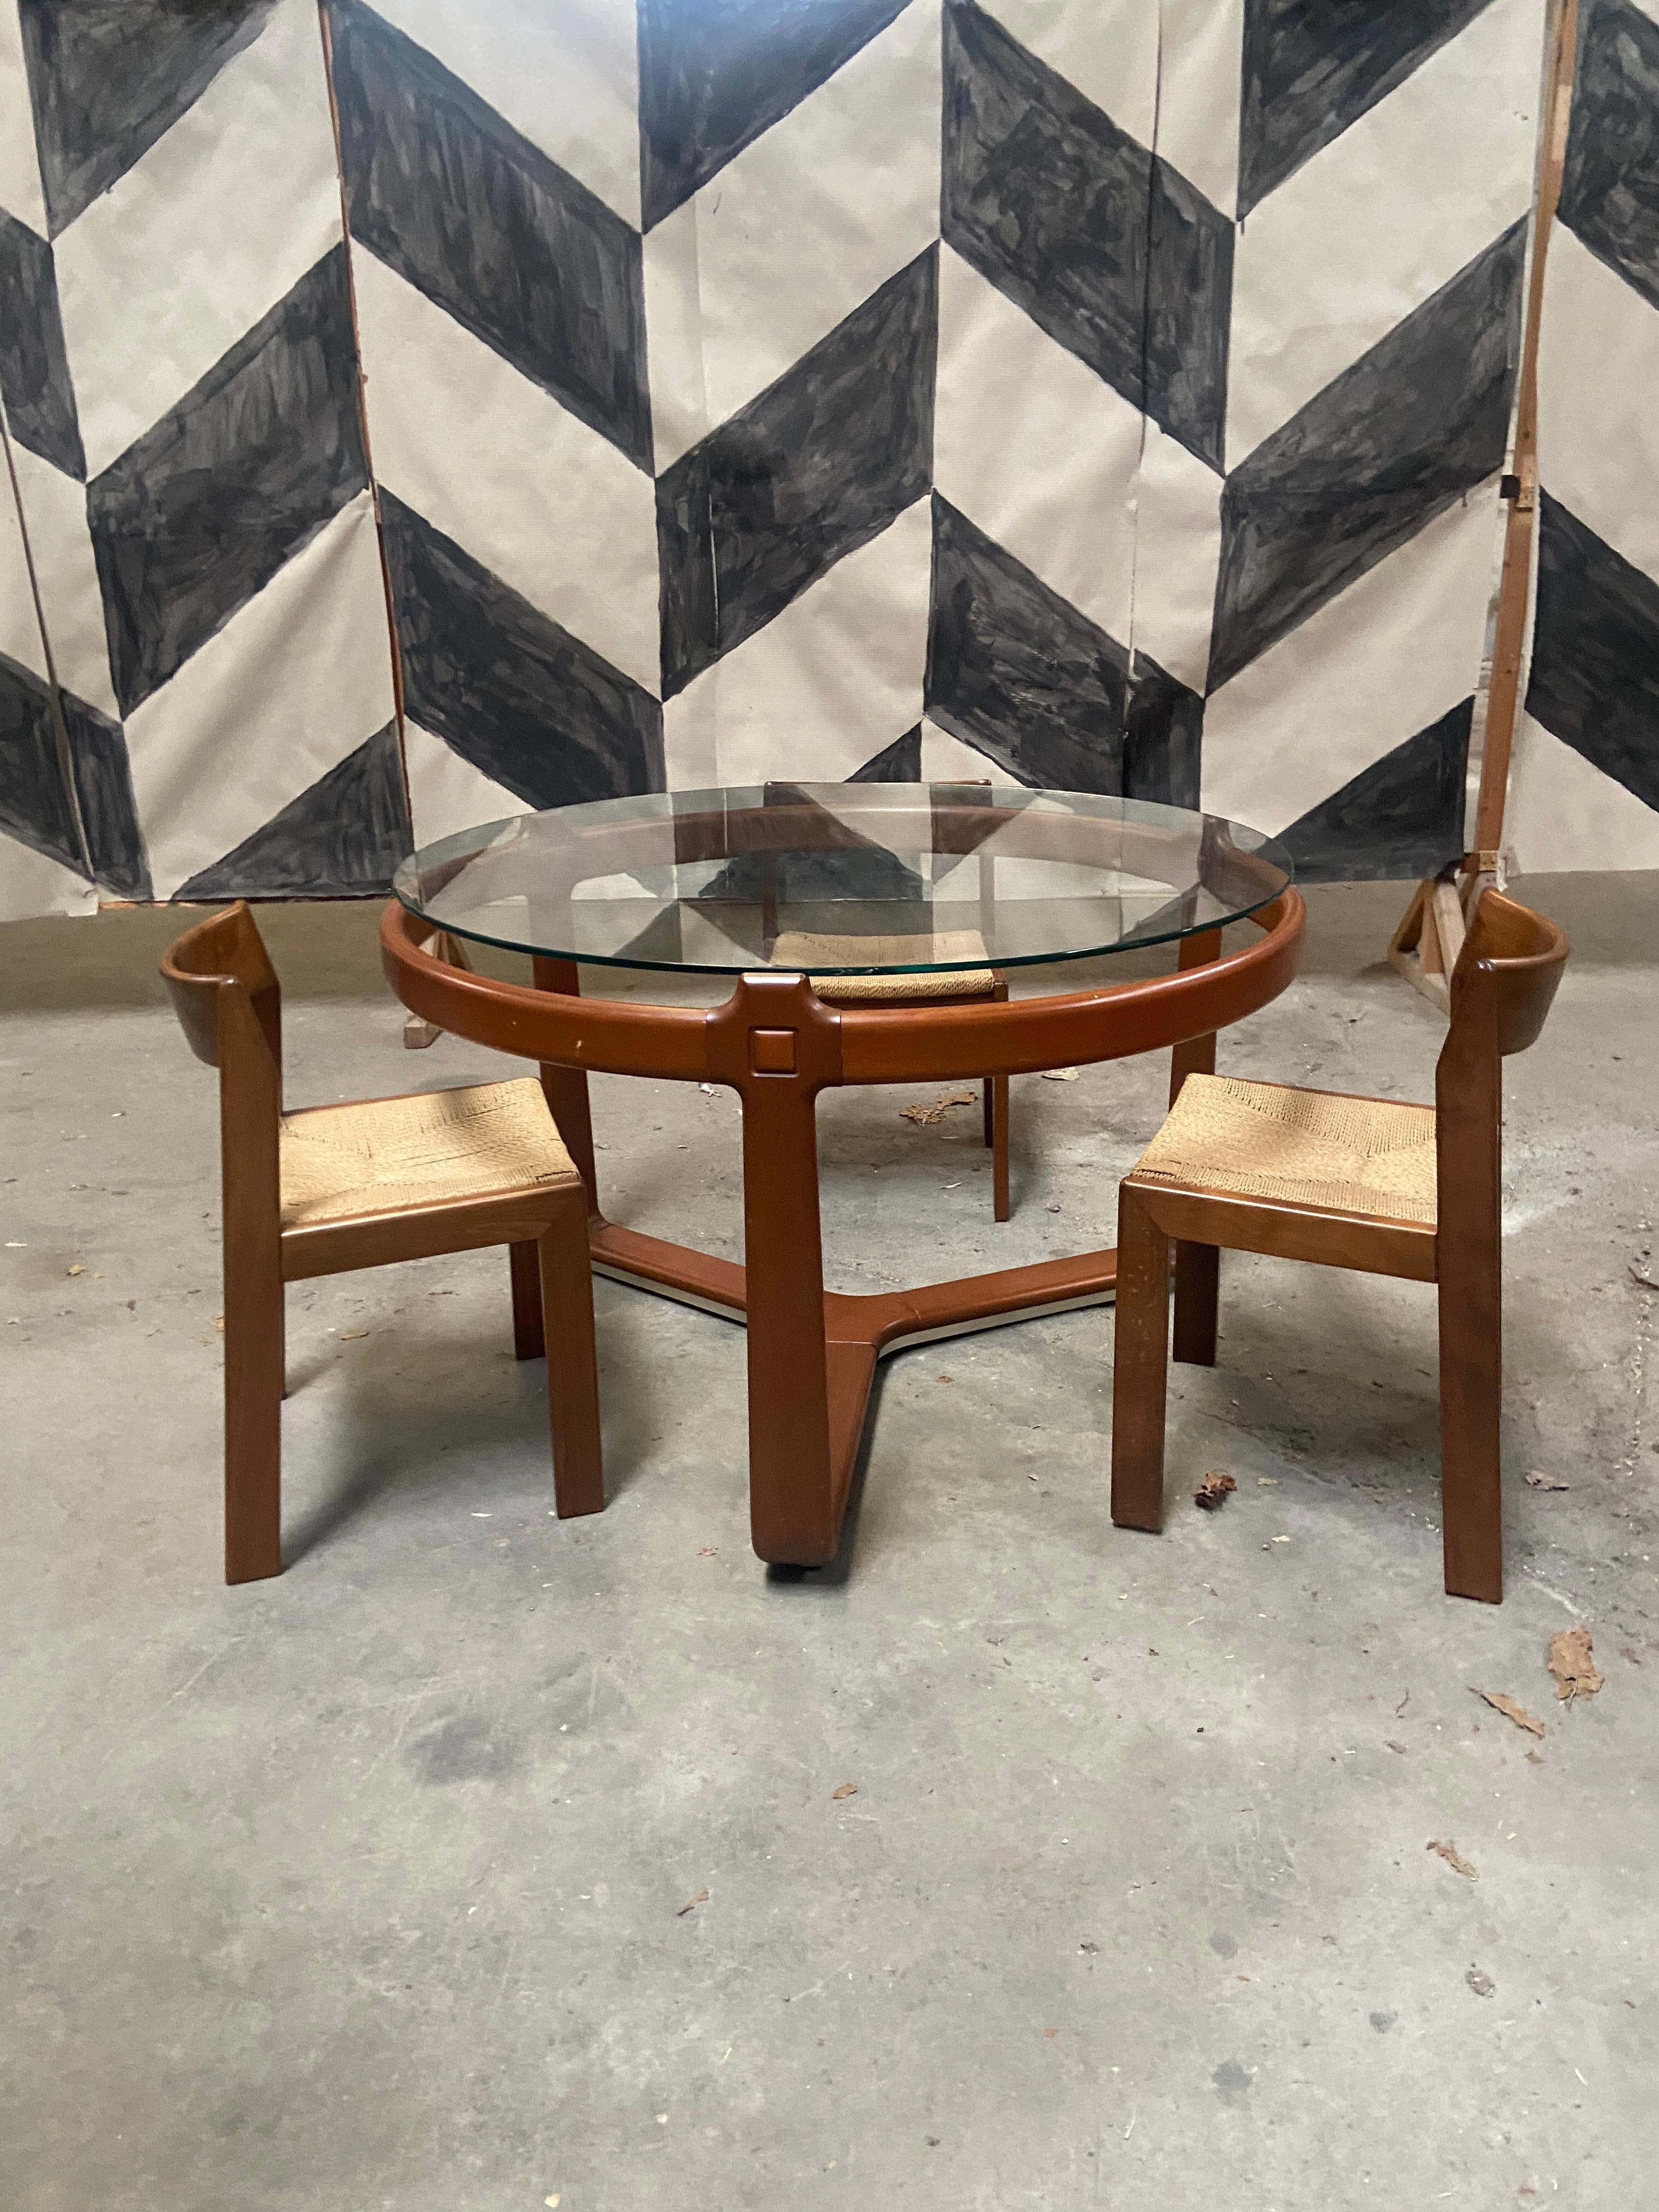 Late 20th Century Mid-Century Modern Italian Round Table with Smoked Glass Top and 3 Wooden Chairs For Sale